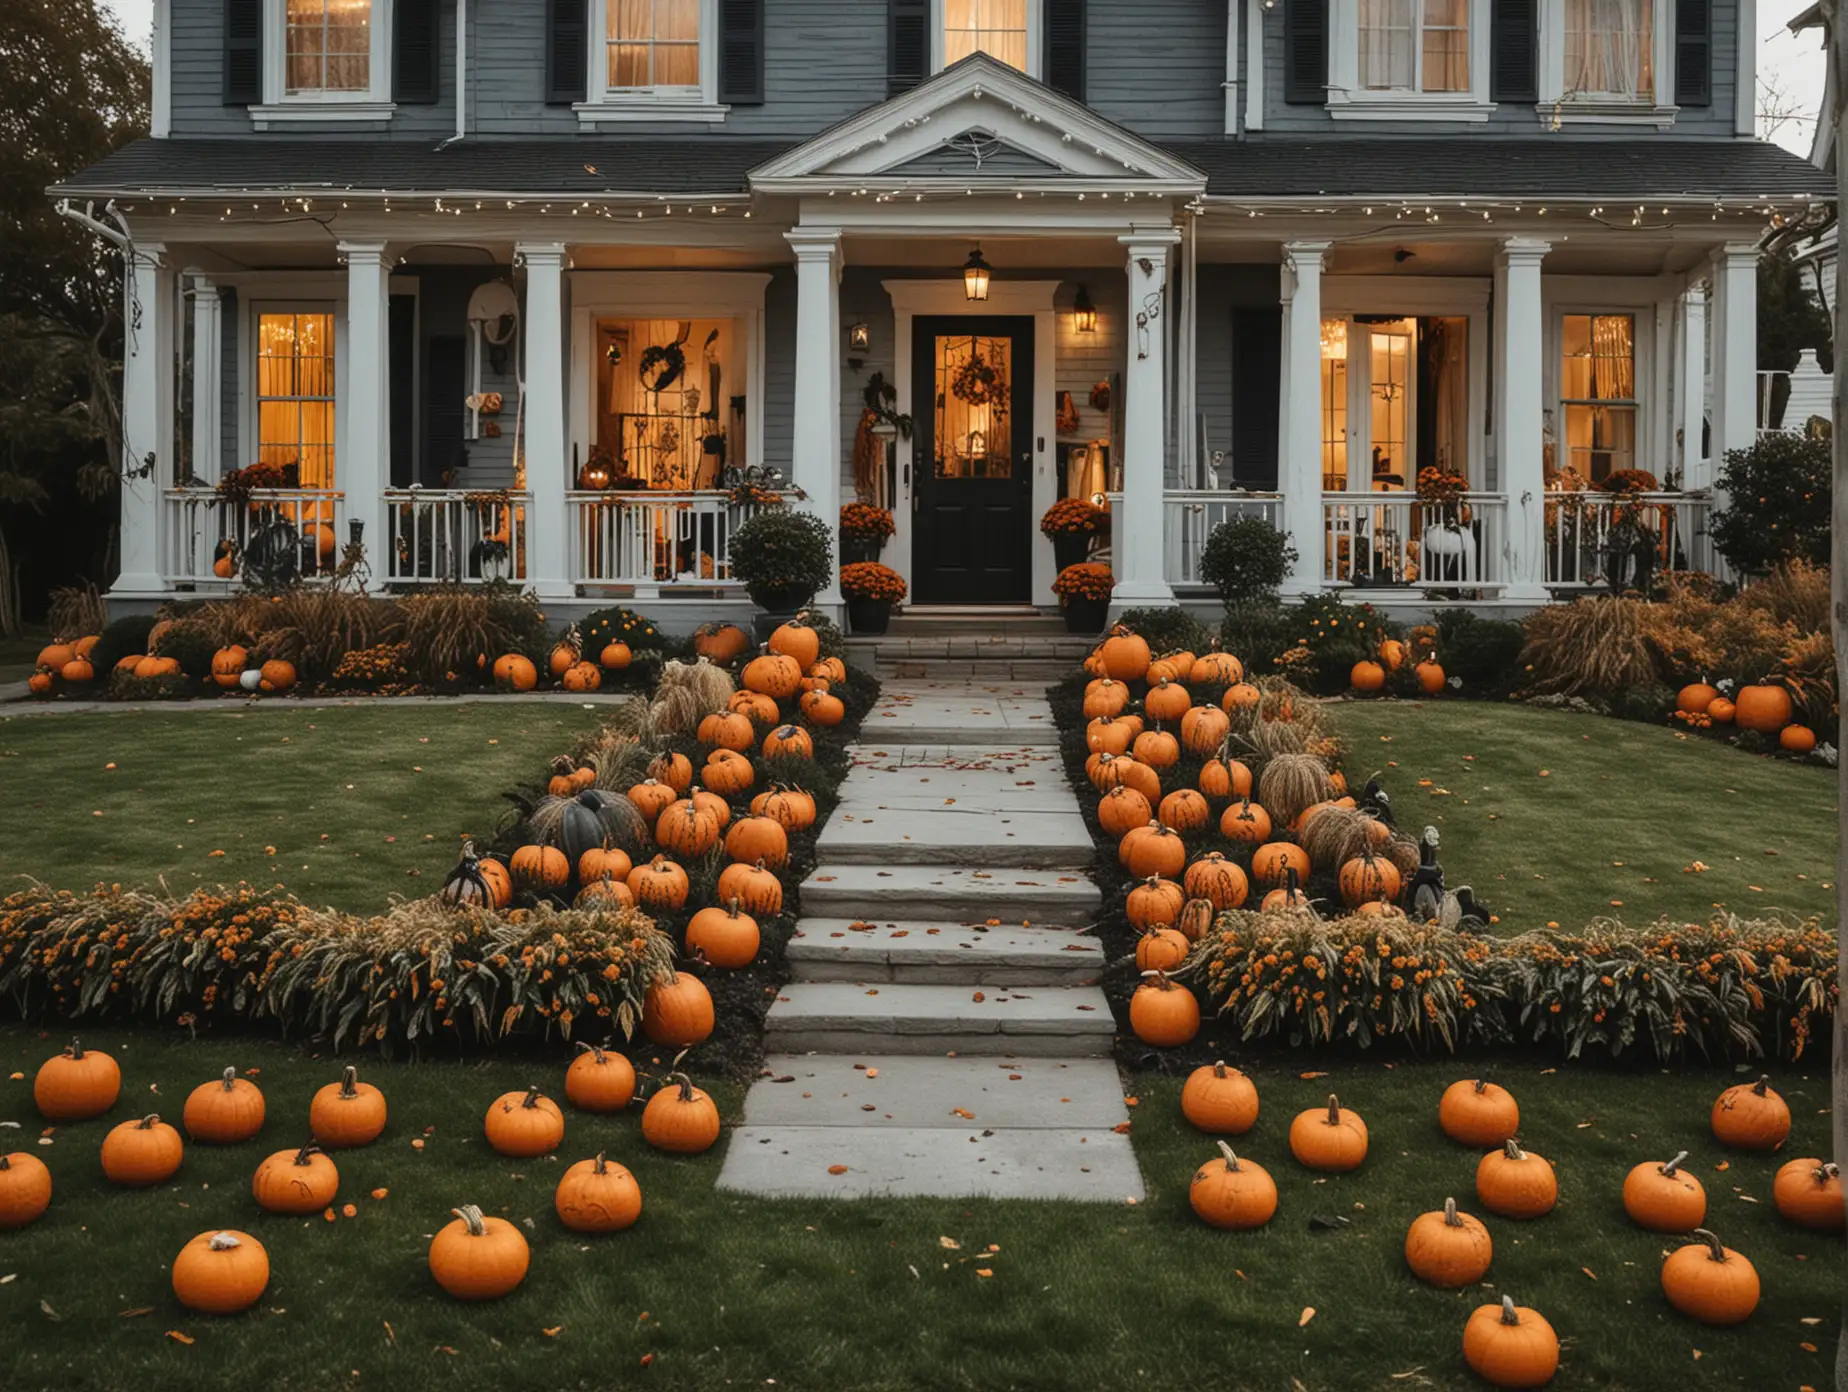 A front yard decorated with pumpkins for Halloween